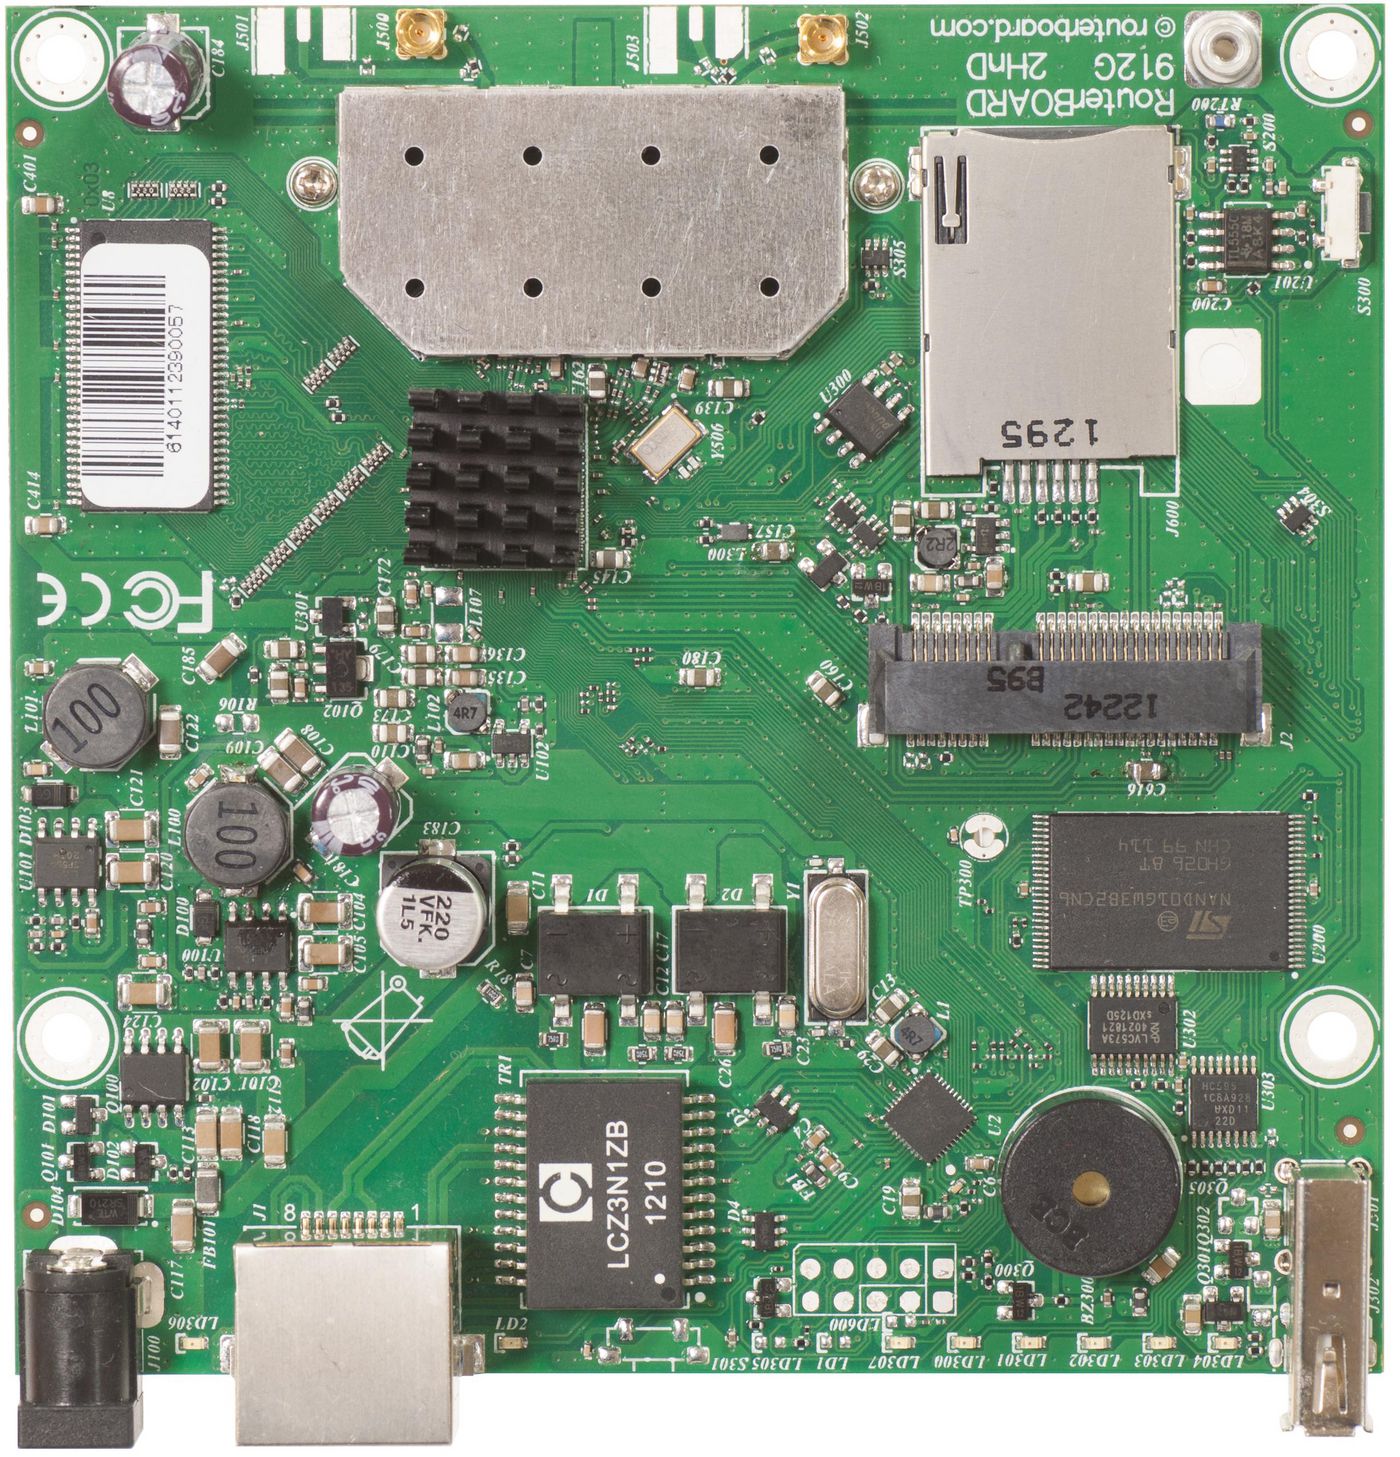 MikroTik RB912UAG-2HPND RouterBOARD 912UAG with 600Mhz 